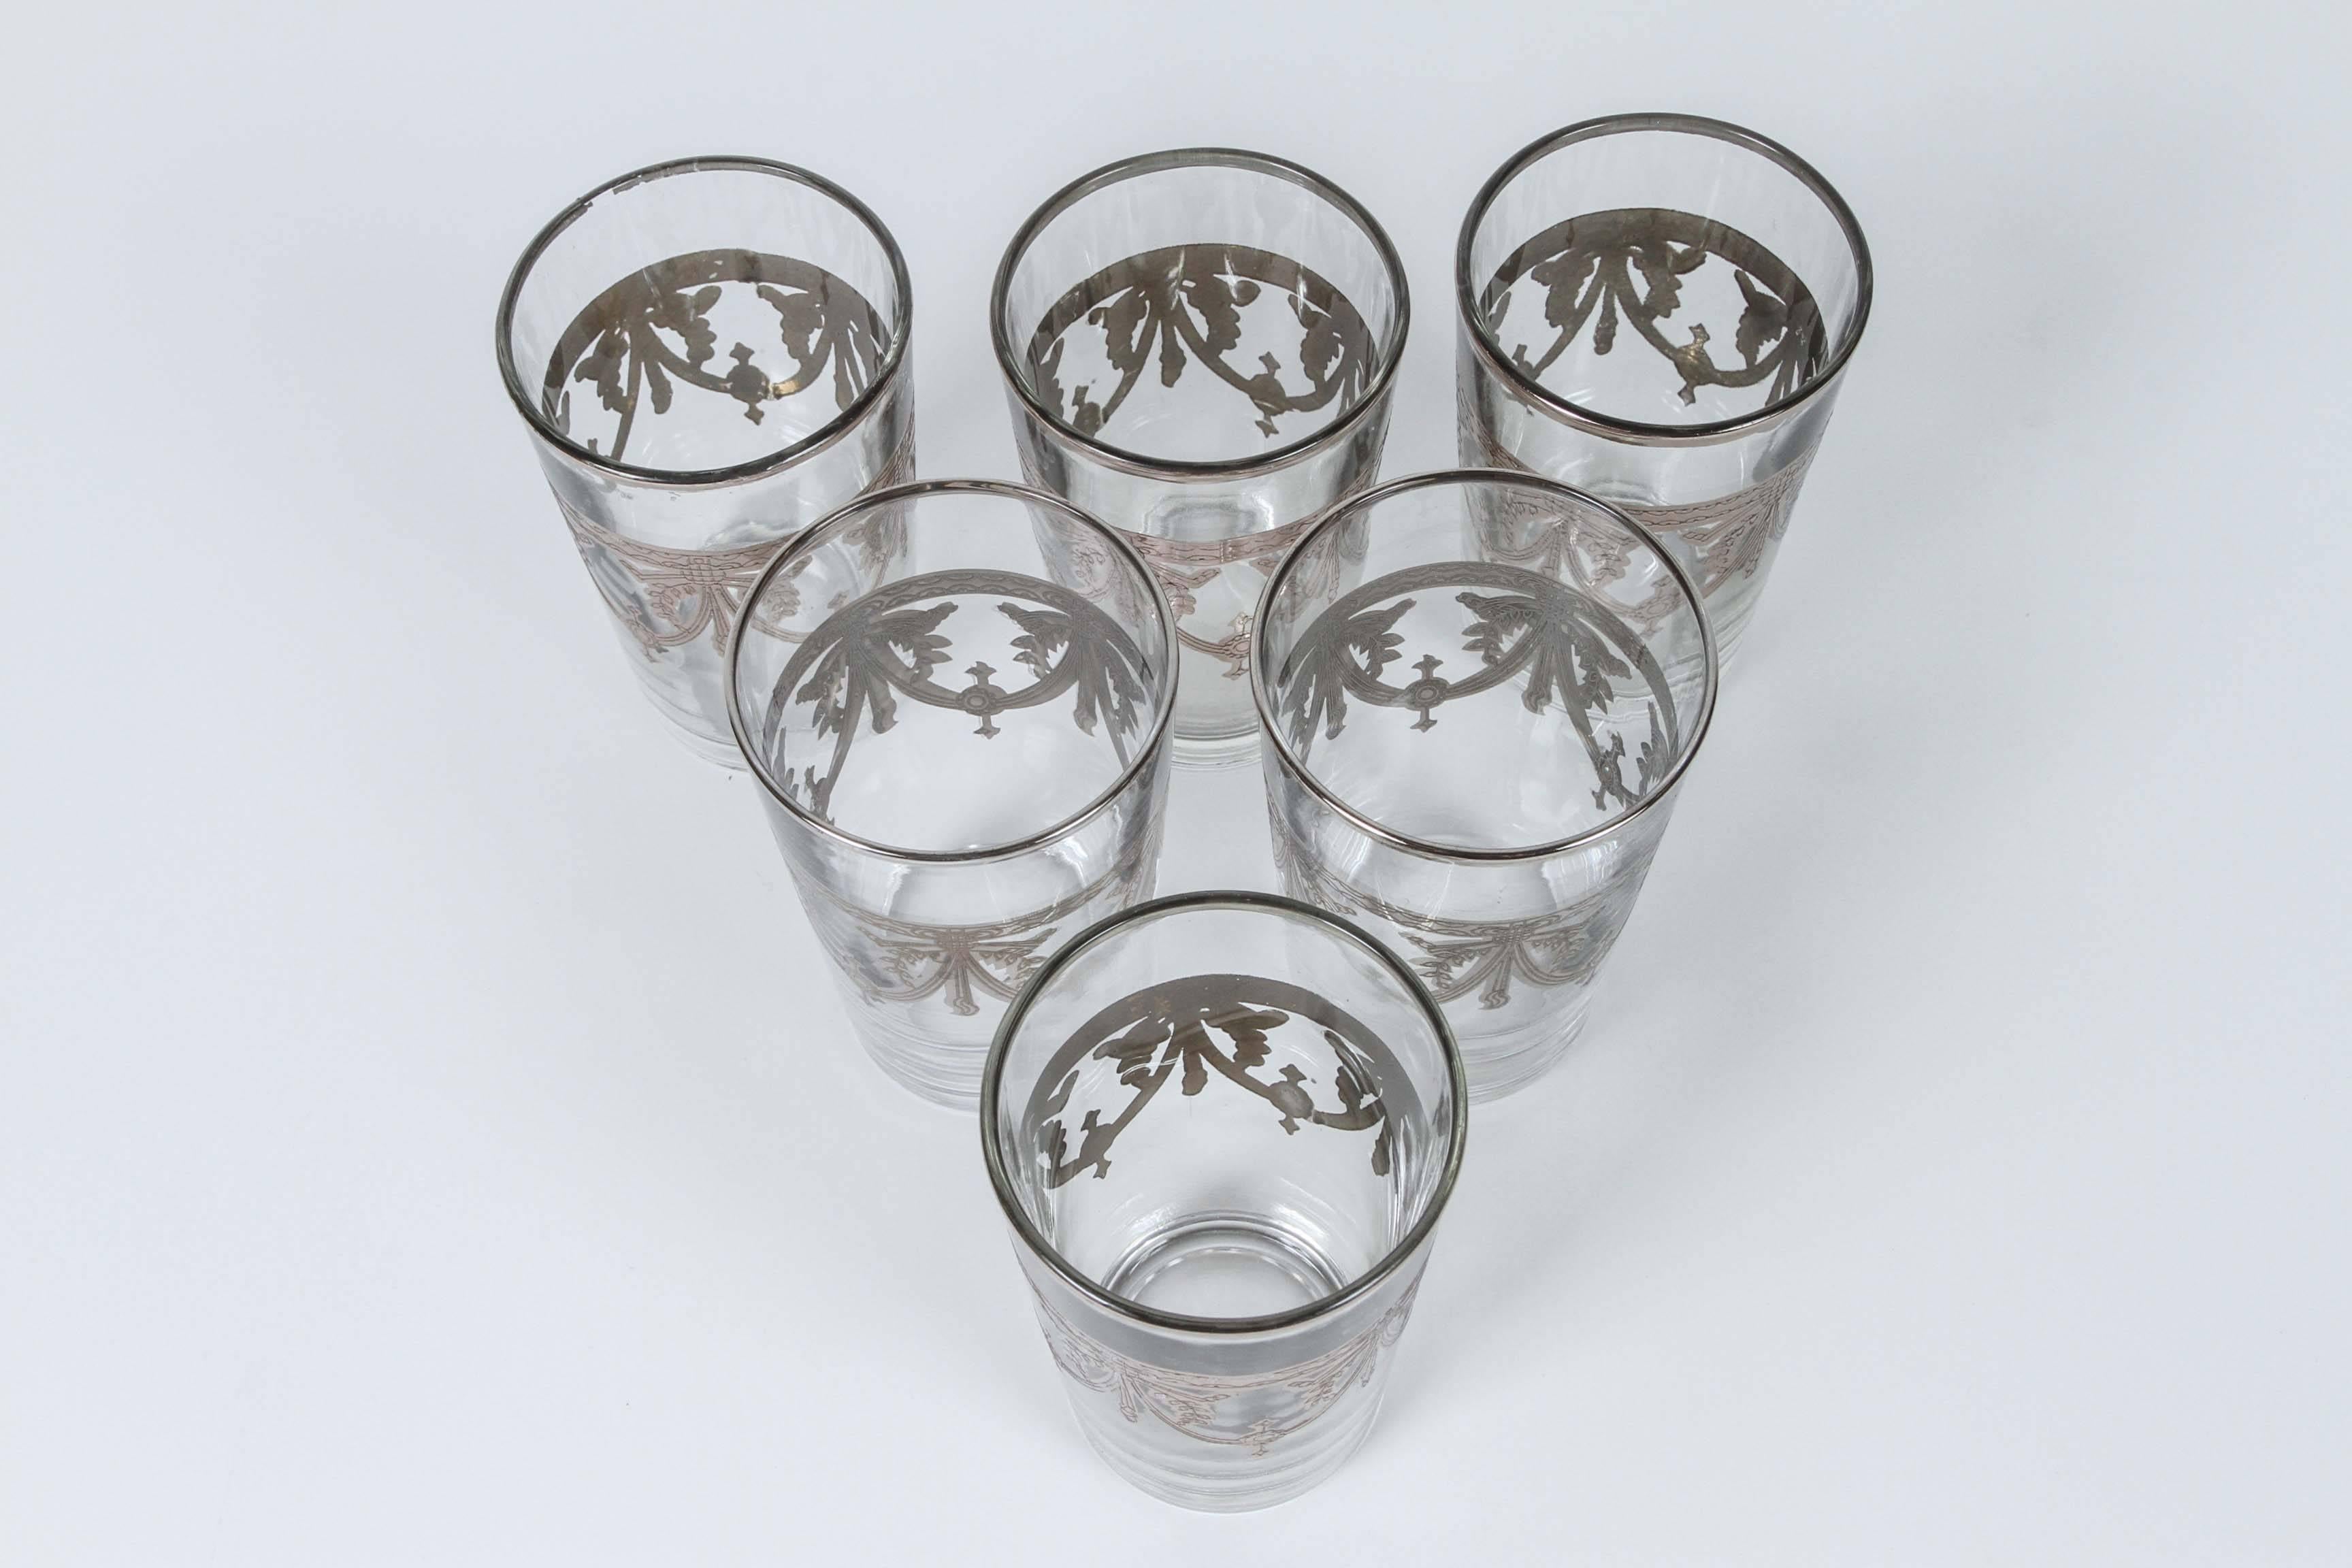 Set of six clear and silver glasses.
Decorated with a classical silver pattern frieze.
Use these elegant glasses for Moroccan tea, or any hot or cold drink.
In fantastic condition, perfect for the holidays and gorgeous on display in a cabinet or bar